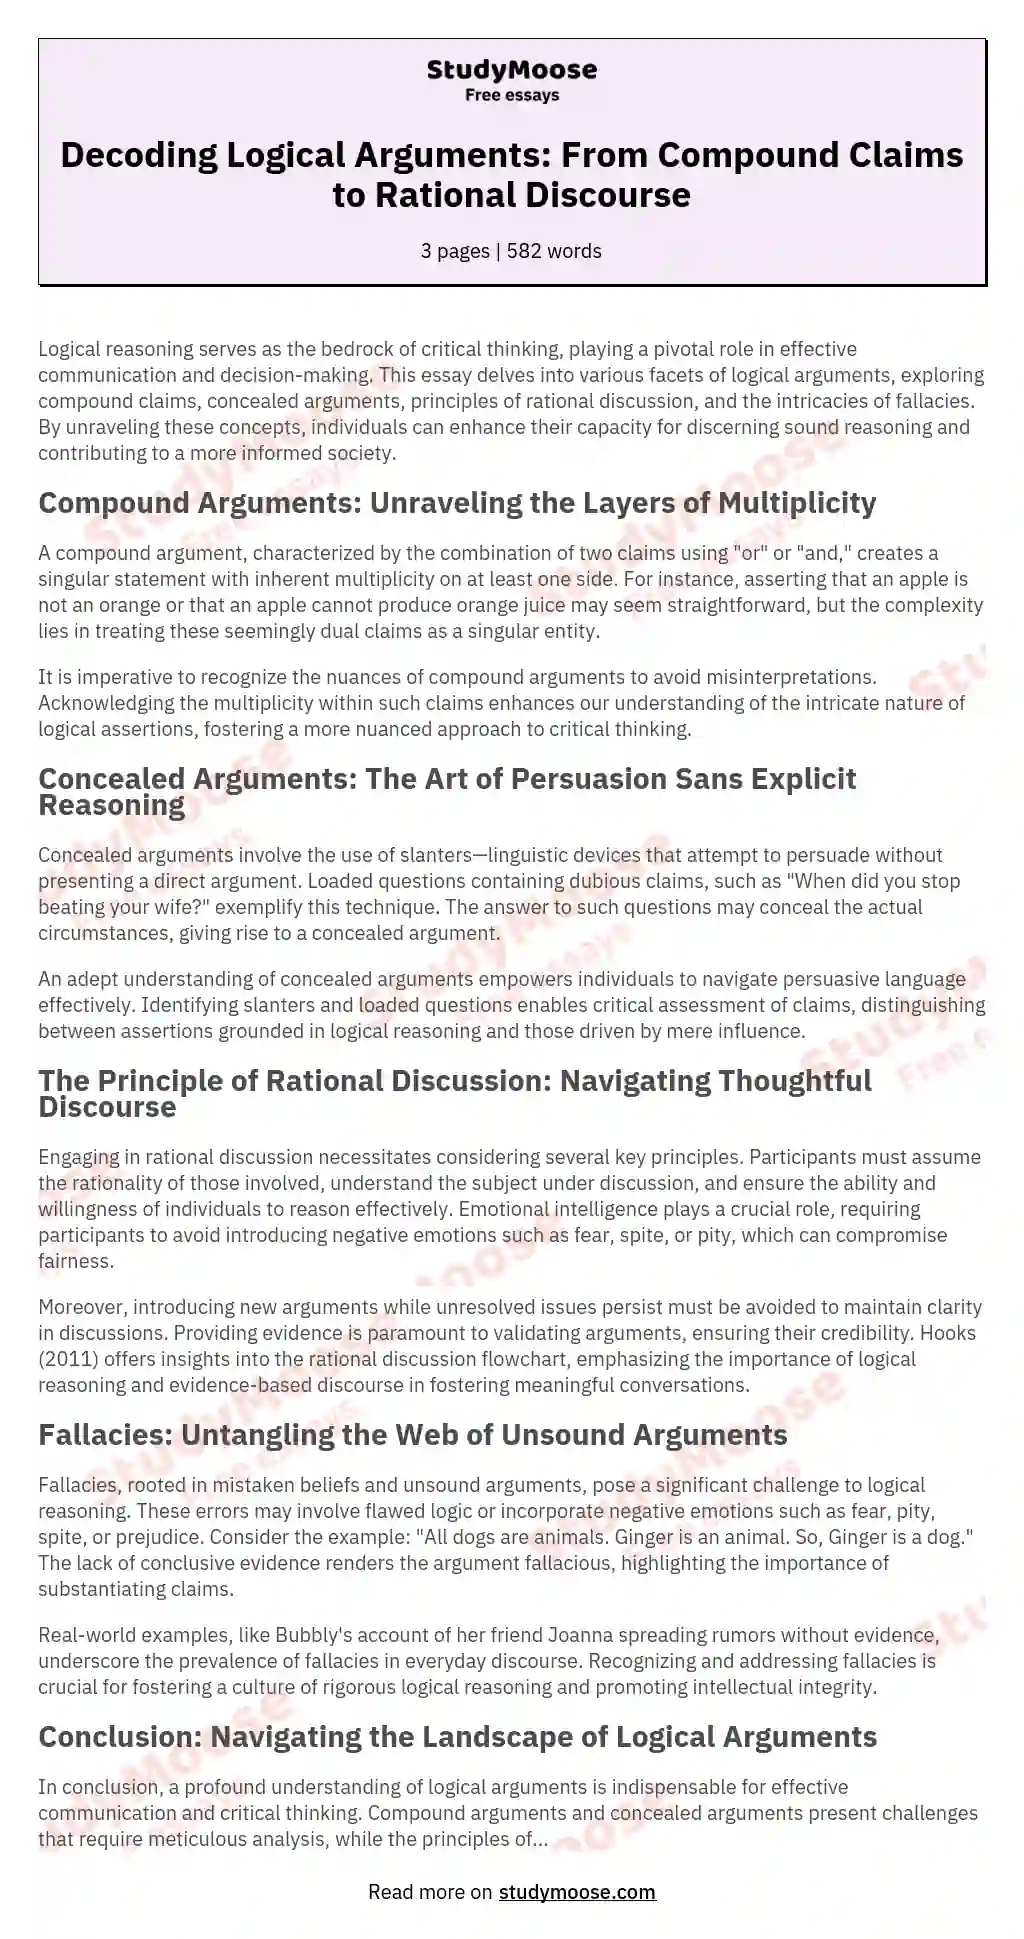 Decoding Logical Arguments: From Compound Claims to Rational Discourse essay